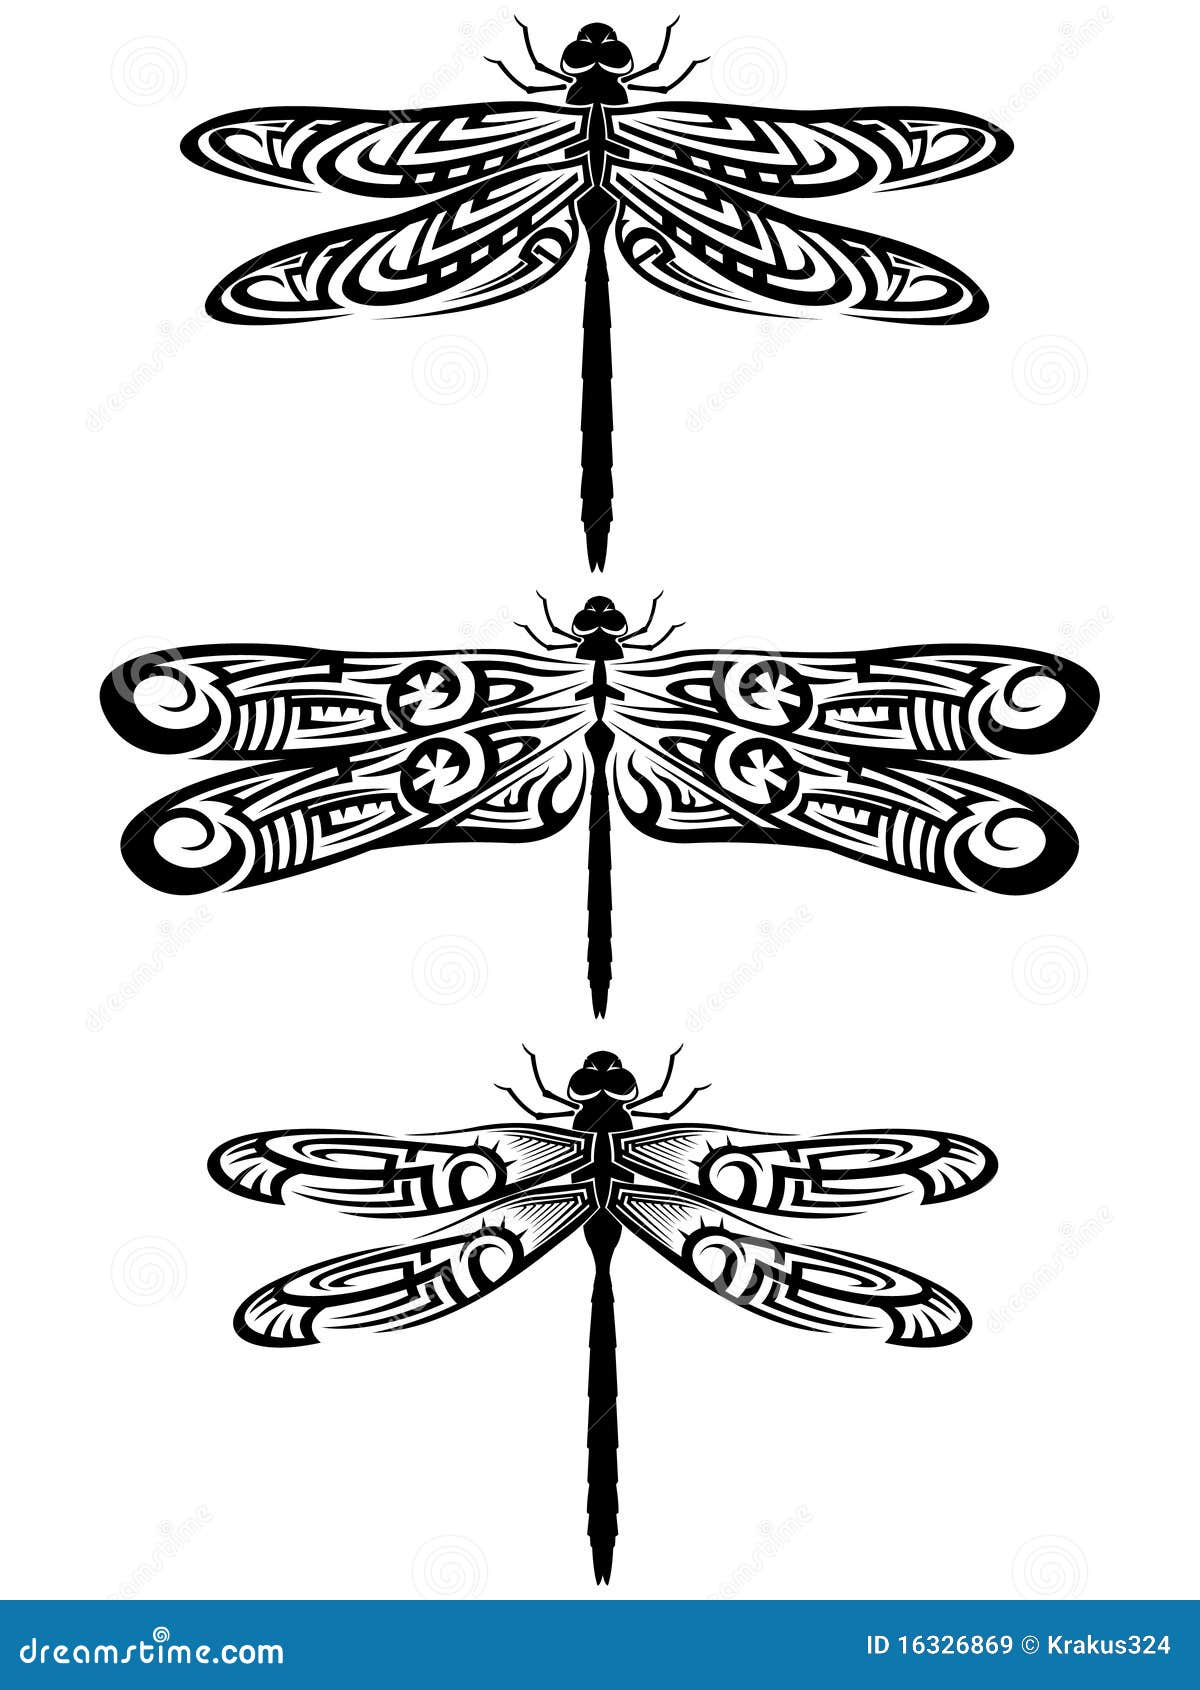 Explore 101 Stunning Dragonfly Tattoo Ideas in 2023